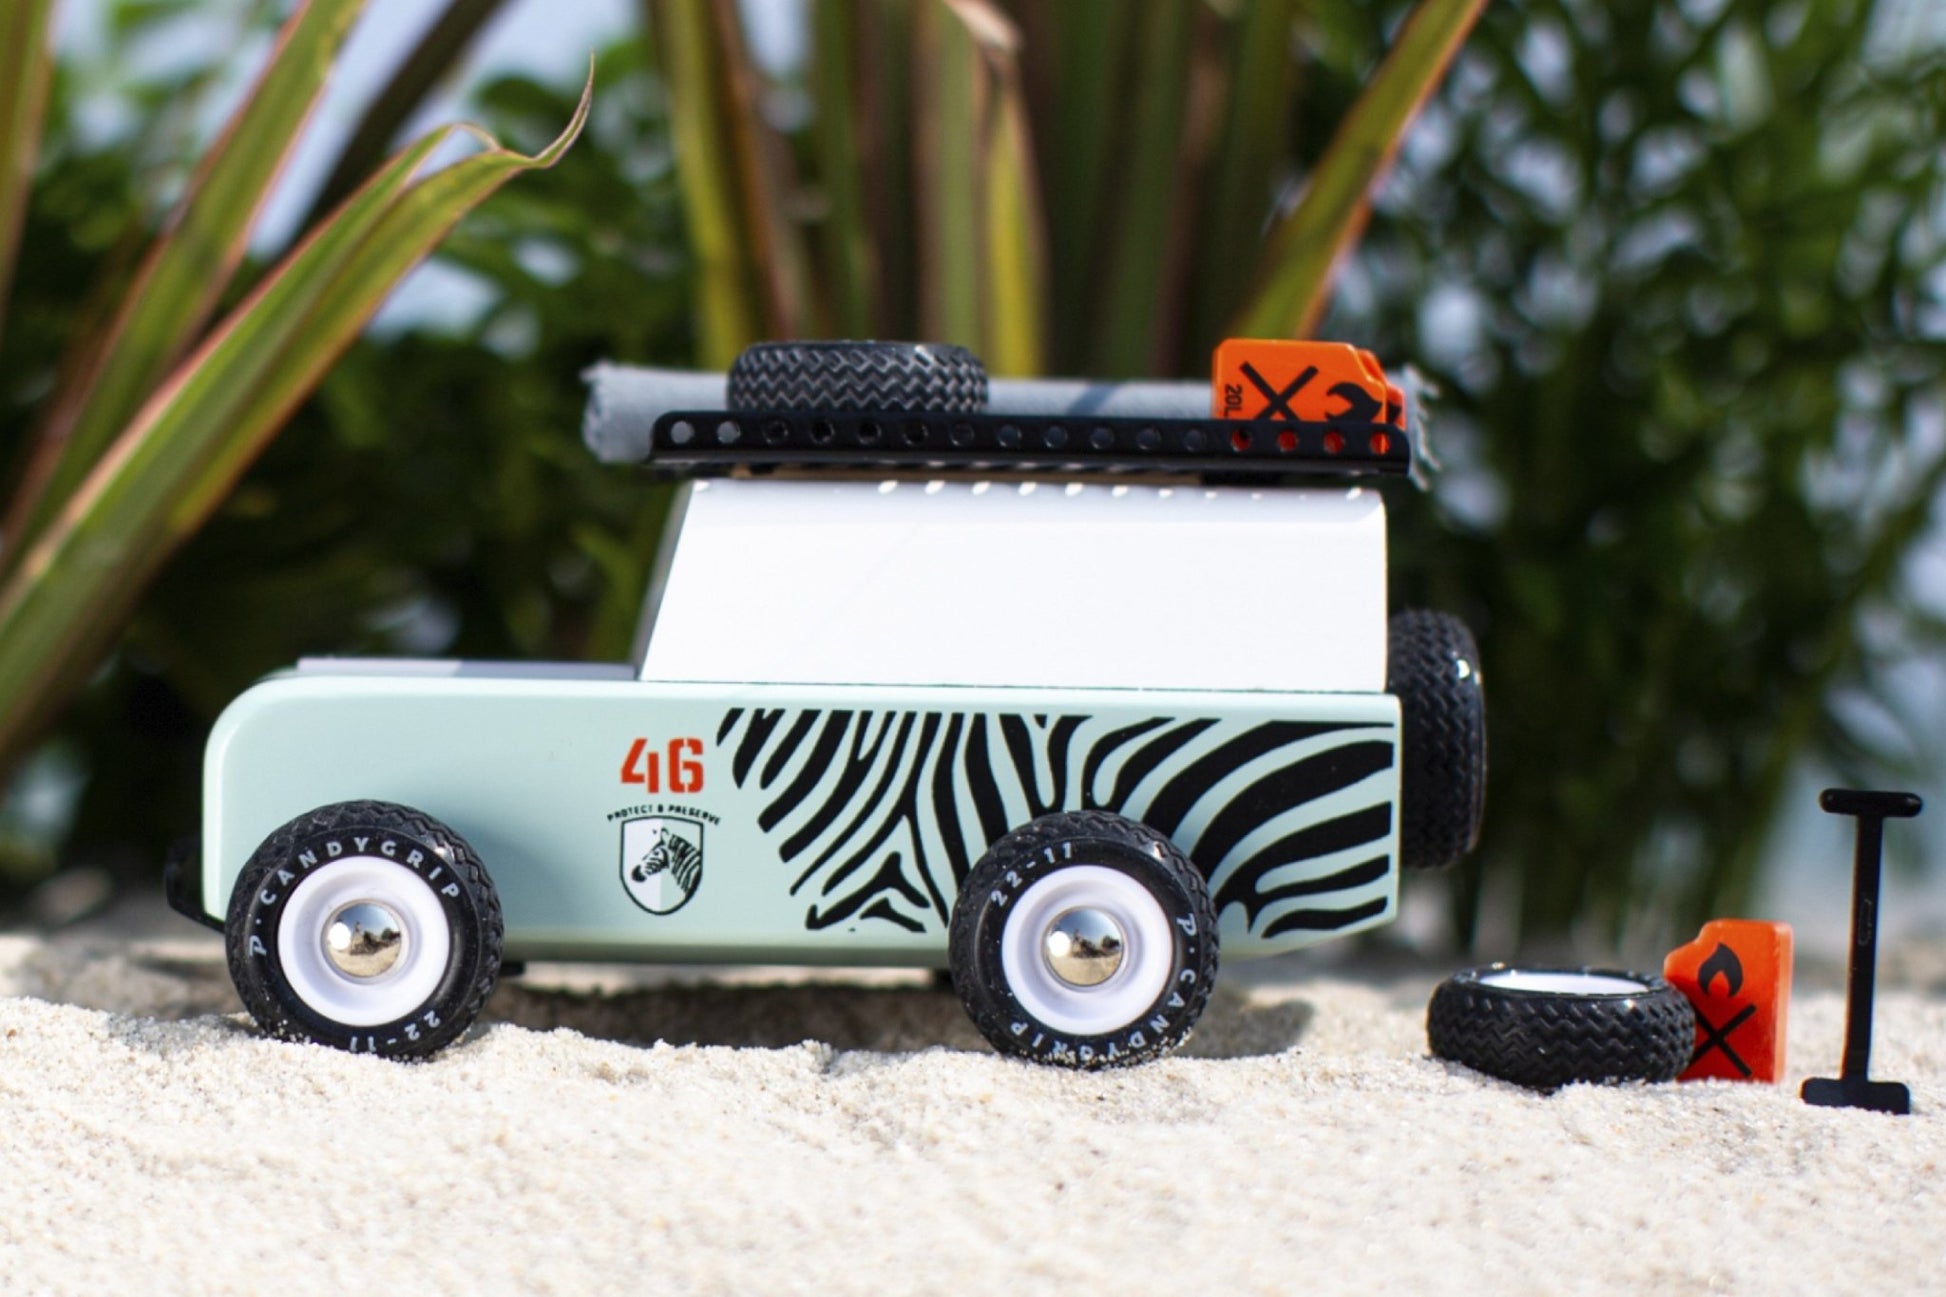 Candylab Toys Drifter Zebra- Modern Vintage Adventure Vehicle - Wood Wood Toys Canada's Favourite Montessori Toy Store